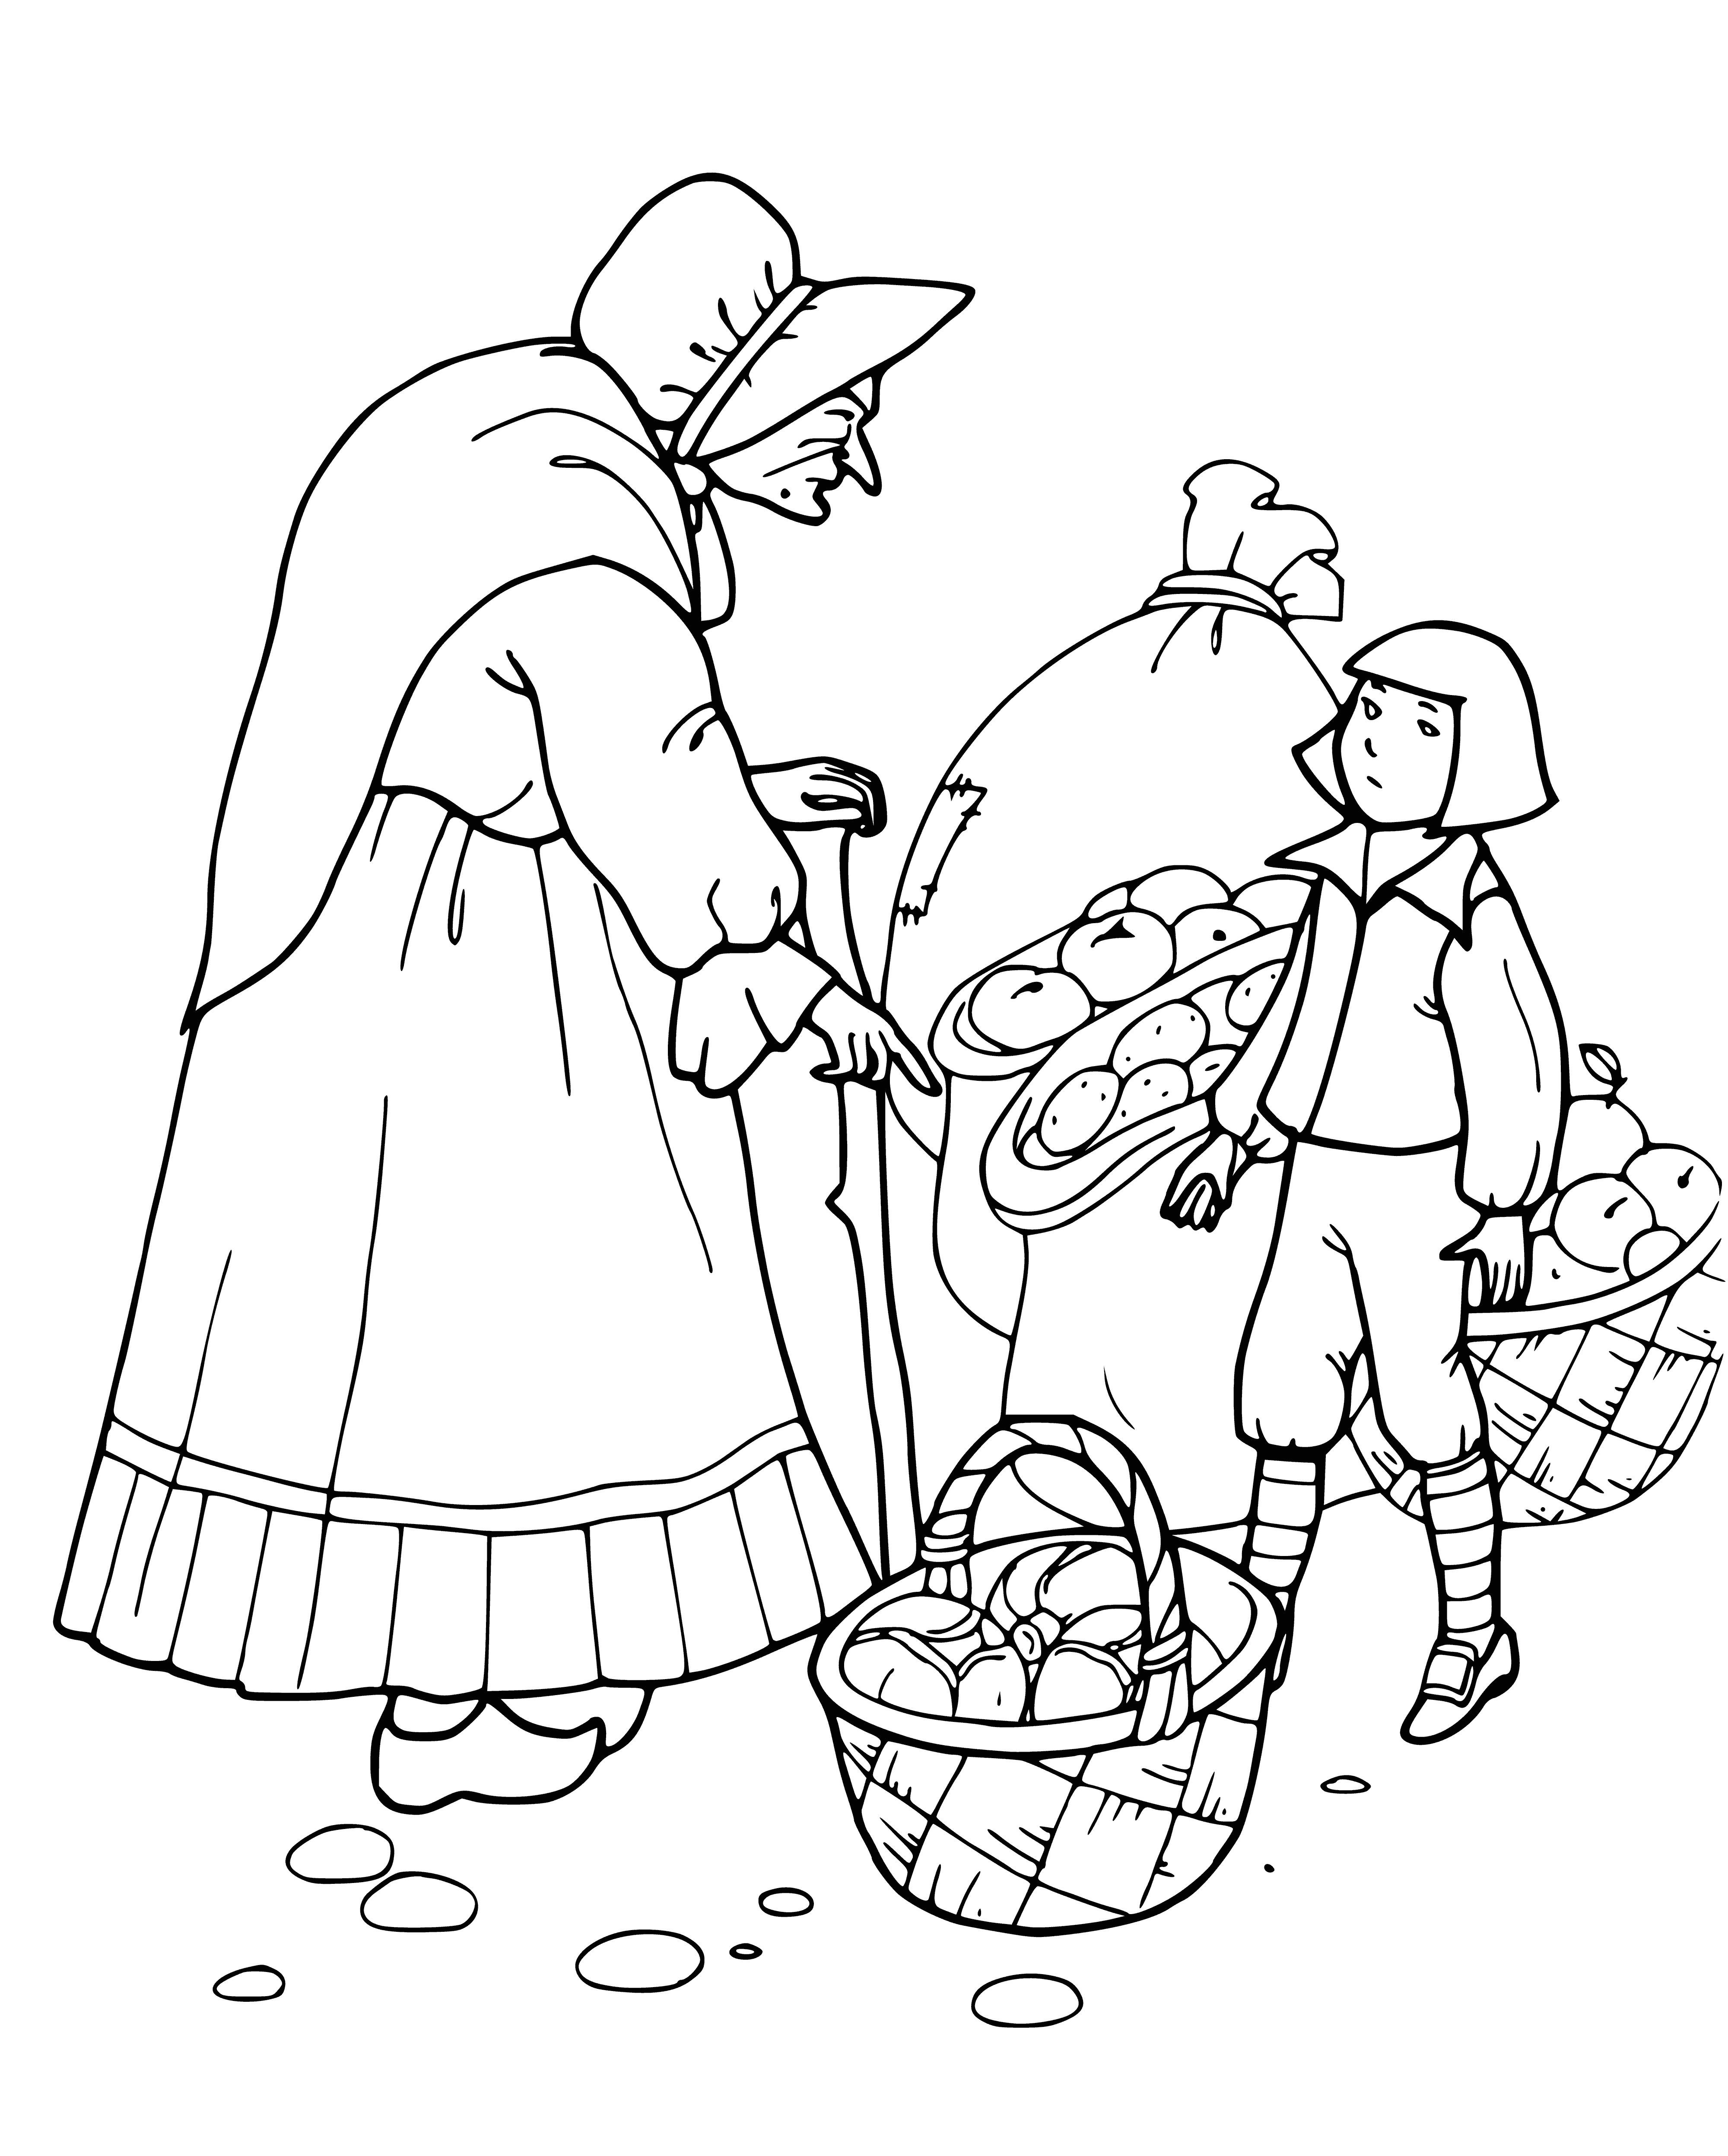 coloring page: Wicked witch stirring cauldron, has rat & raven, eerie green glow, black clothing & cape; cat lazily rests on cauldron rim.